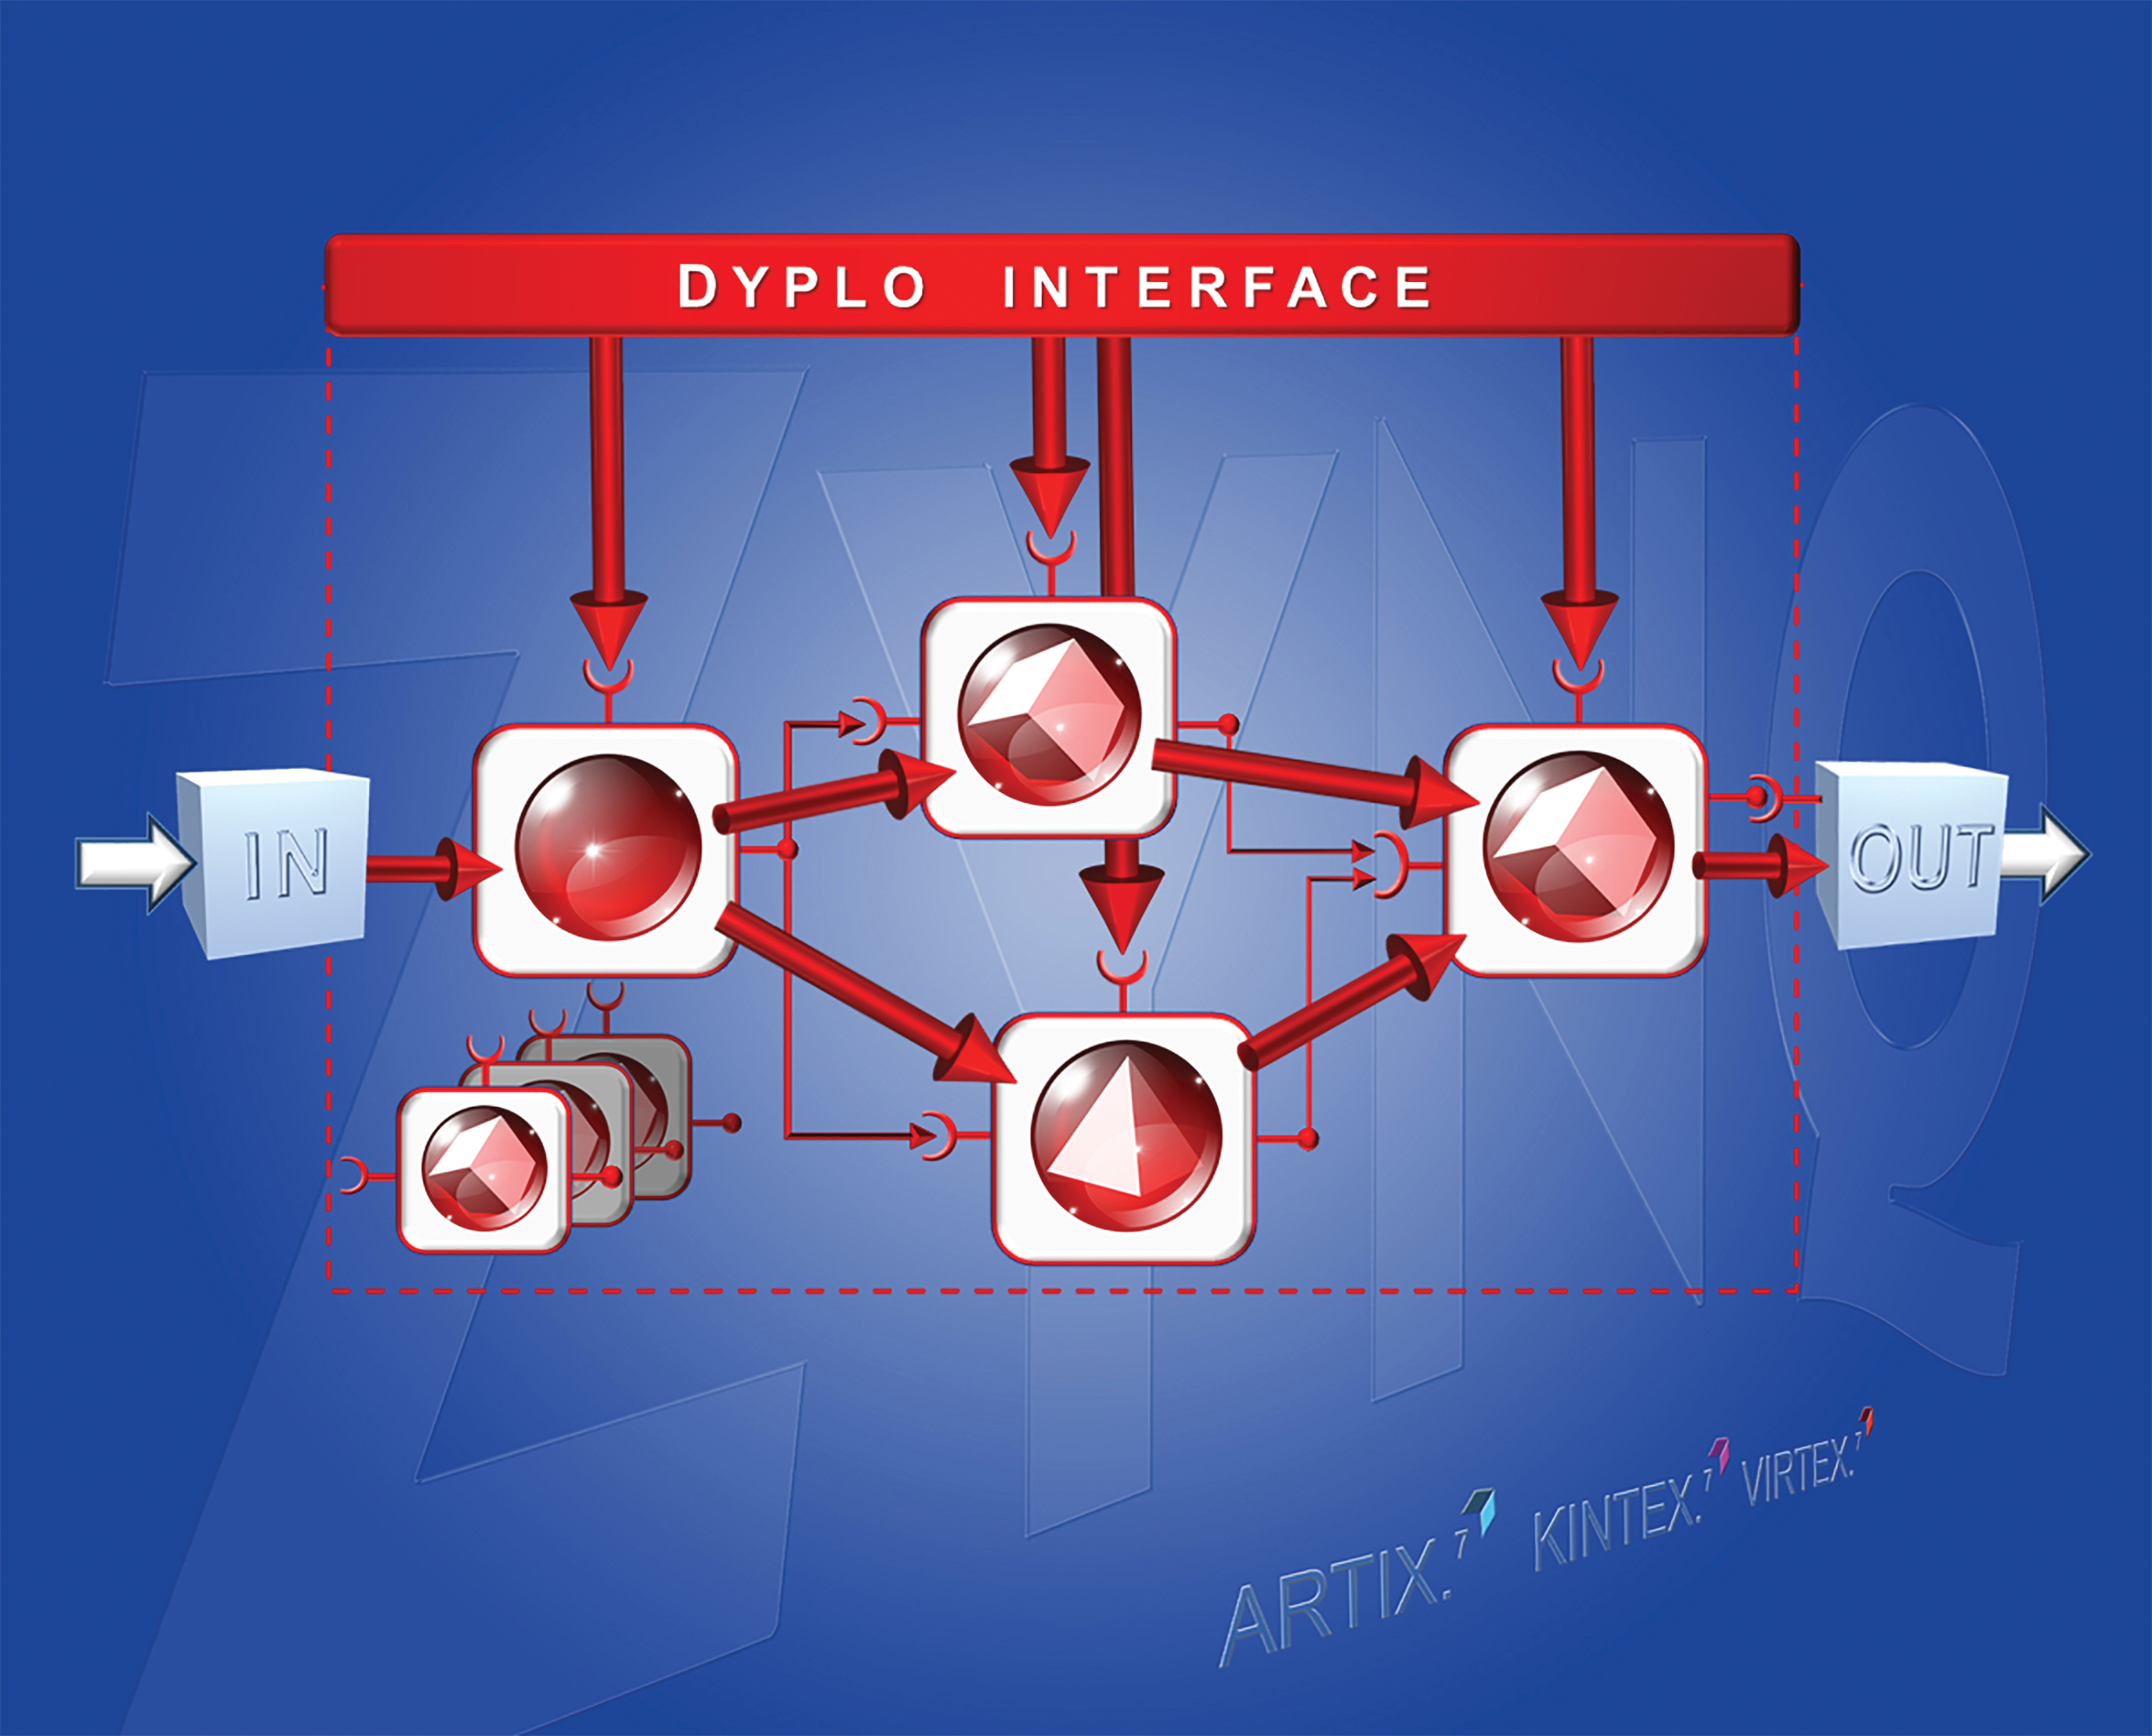 Figure 2: The balls, cubes and pyramids represent functions or processes that can run on FPGA hardware or in software. The processes are encapsulated in a Dyplo canvas (the squares around the figures). The arrows represent data flowing from the input through the different processes to the output. The Dyplo interface manages this whole process.